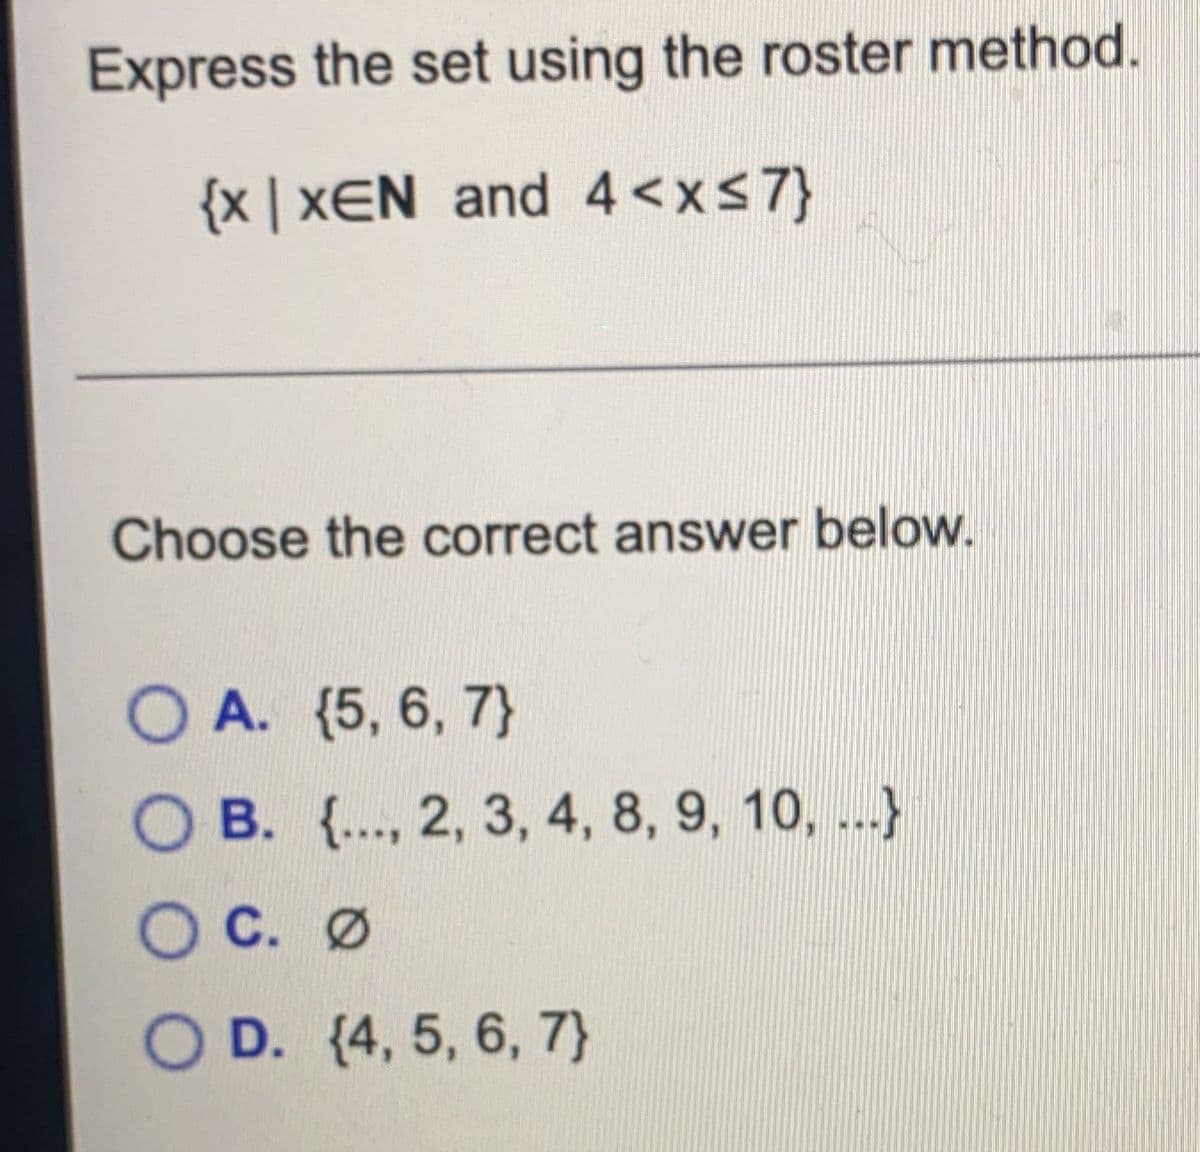 Express the set using the roster method.
{x | xEN and 4 <xs7}
Choose the correct answer below.
O A. (5, 6, 7}
O B. {.., 2, 3, 4, 8, 9, 10, ...}
O C. Ø
O D. (4, 5, 6, 7}
